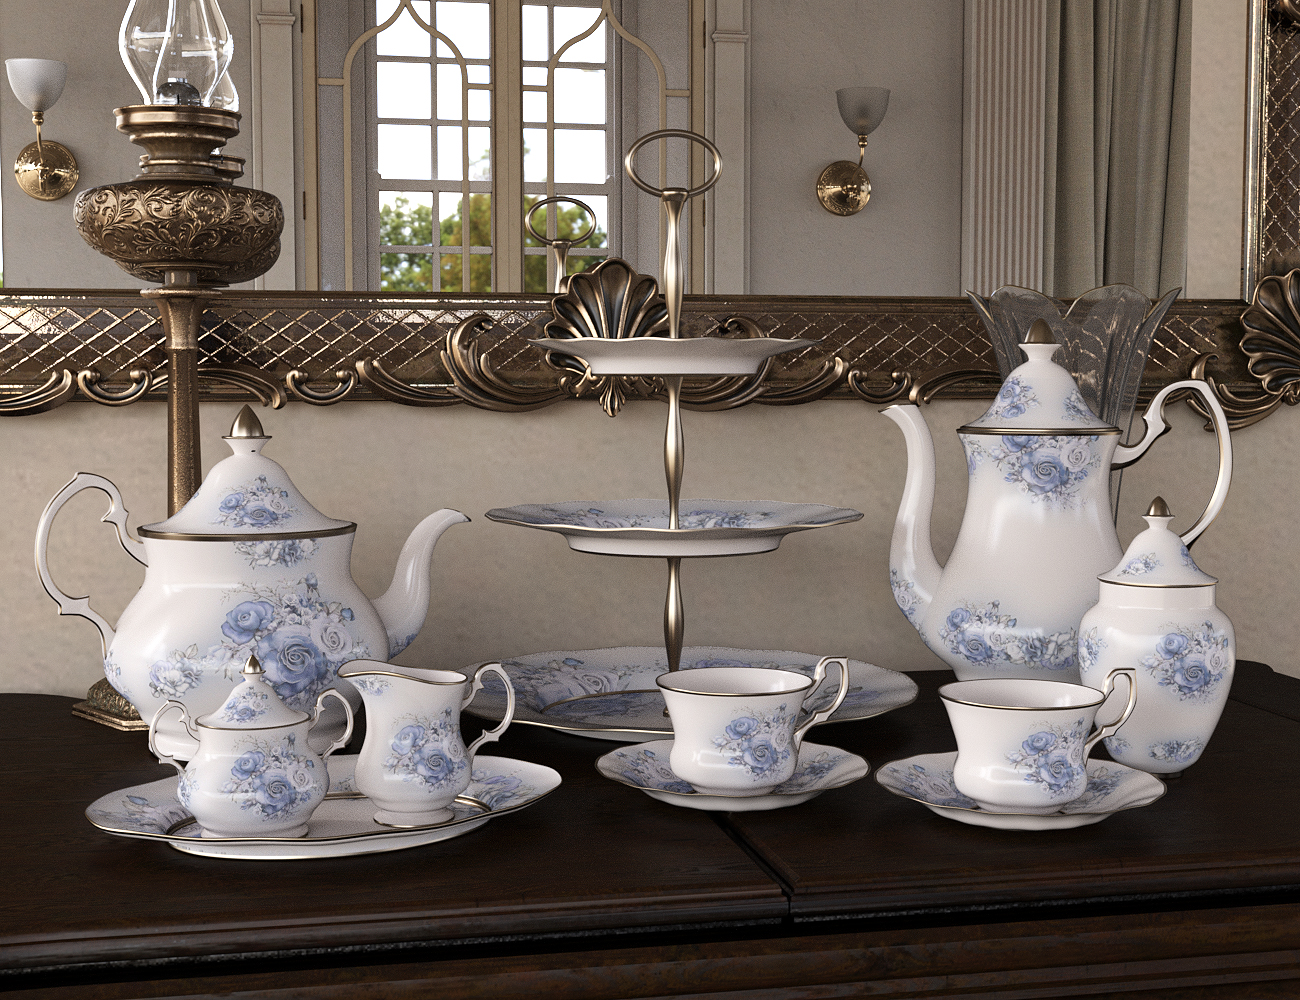 Patterns for Vintage Tea Service Iray by: LaurieS, 3D Models by Daz 3D